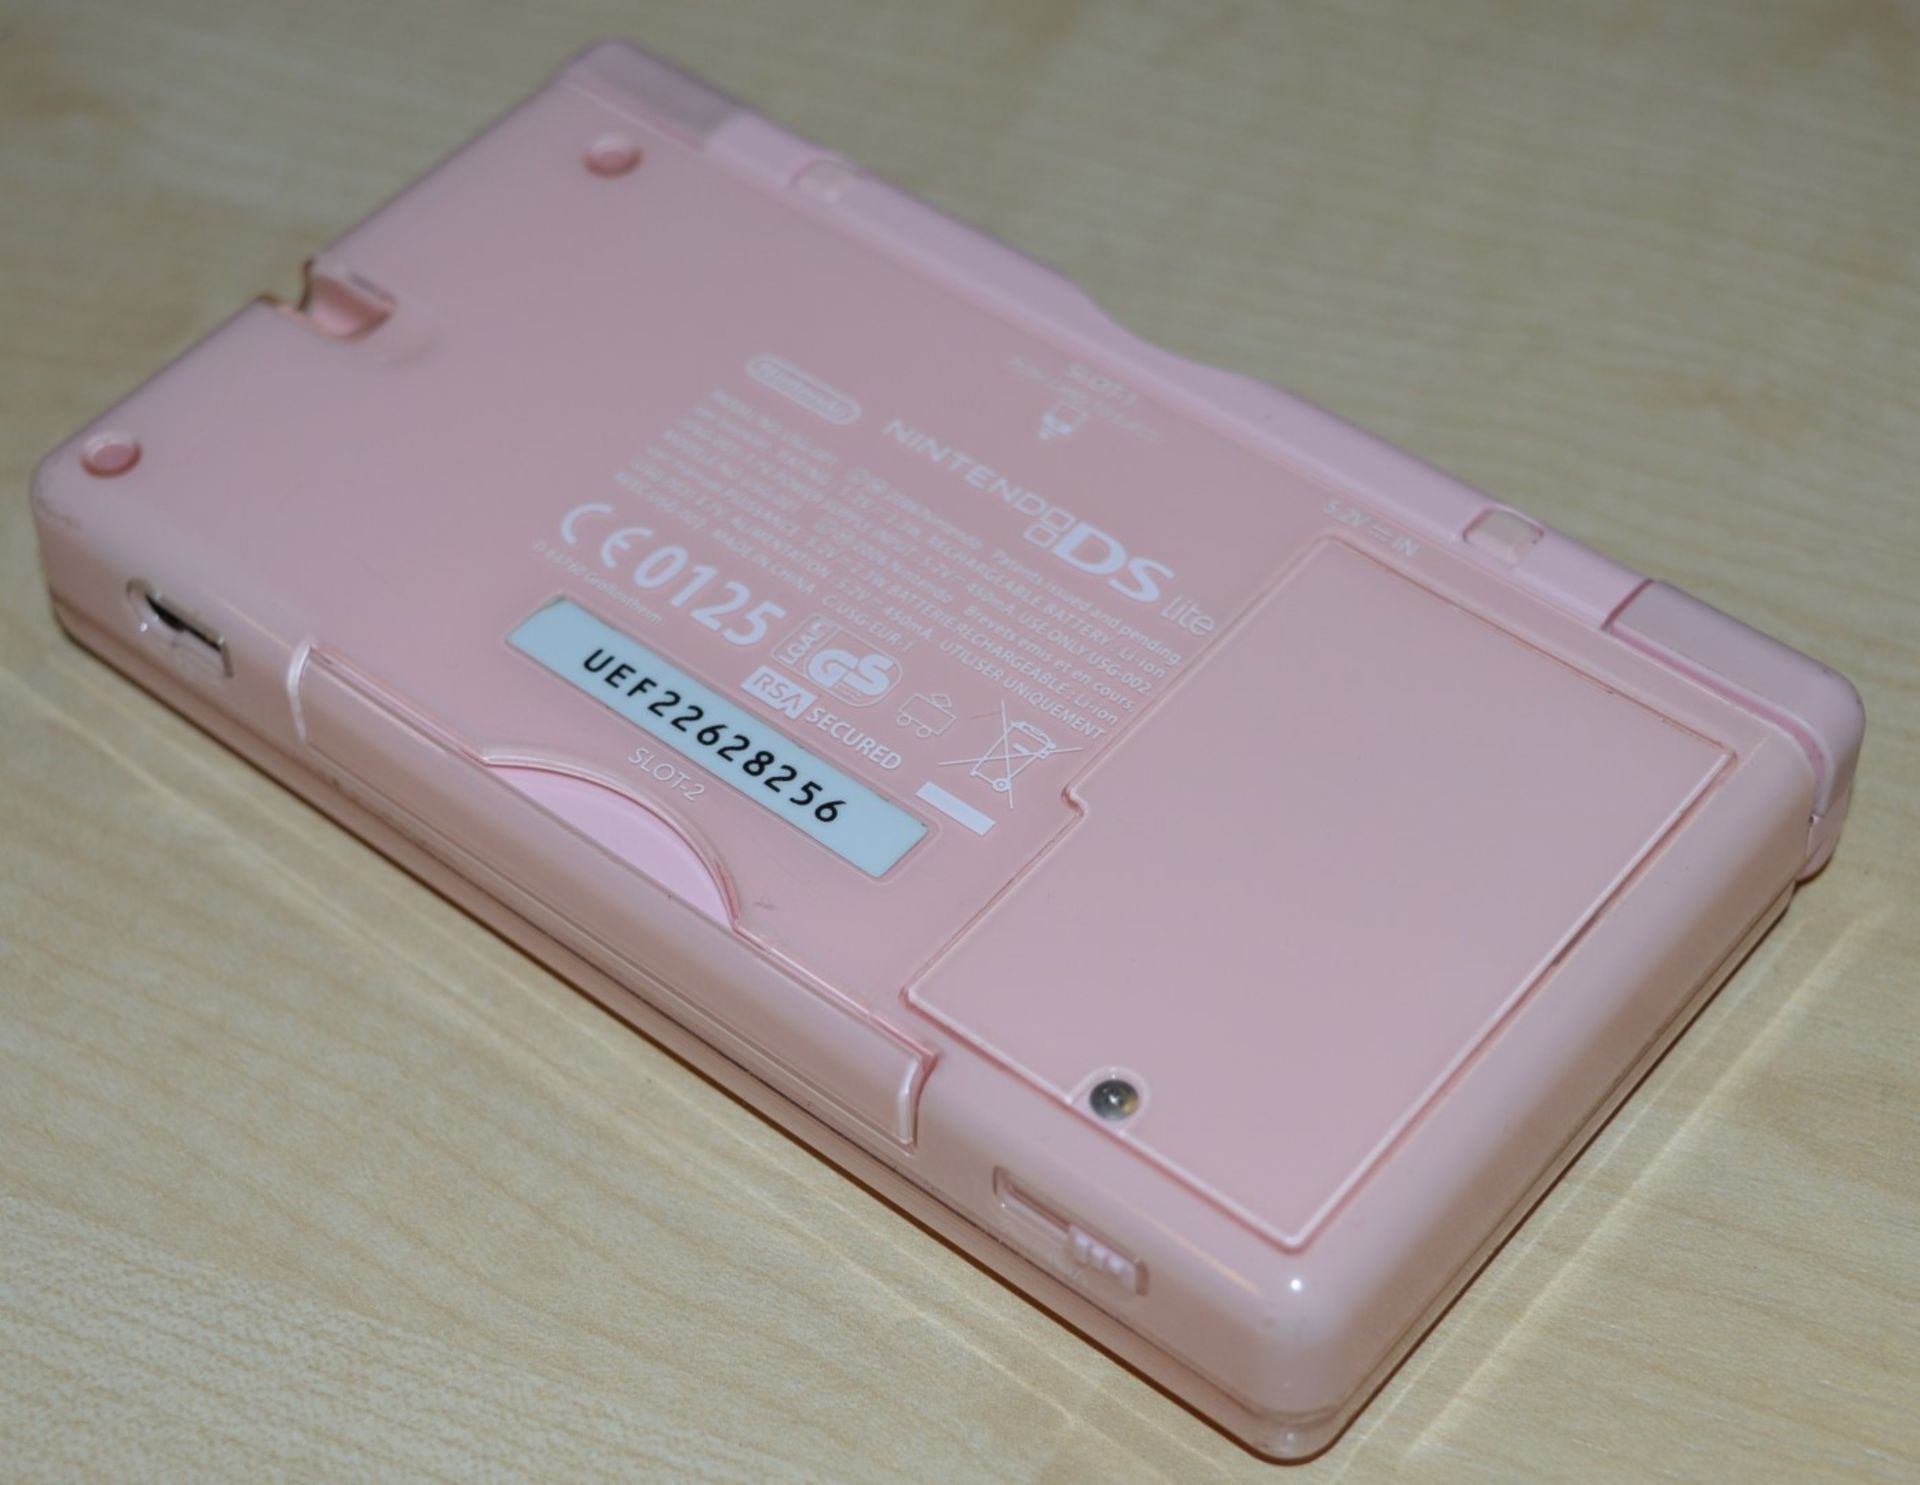 1 x Pink Nintendo DS Lite With High School Musical 2 Game - Includes Touch Pen and Charger - Good - Image 4 of 8